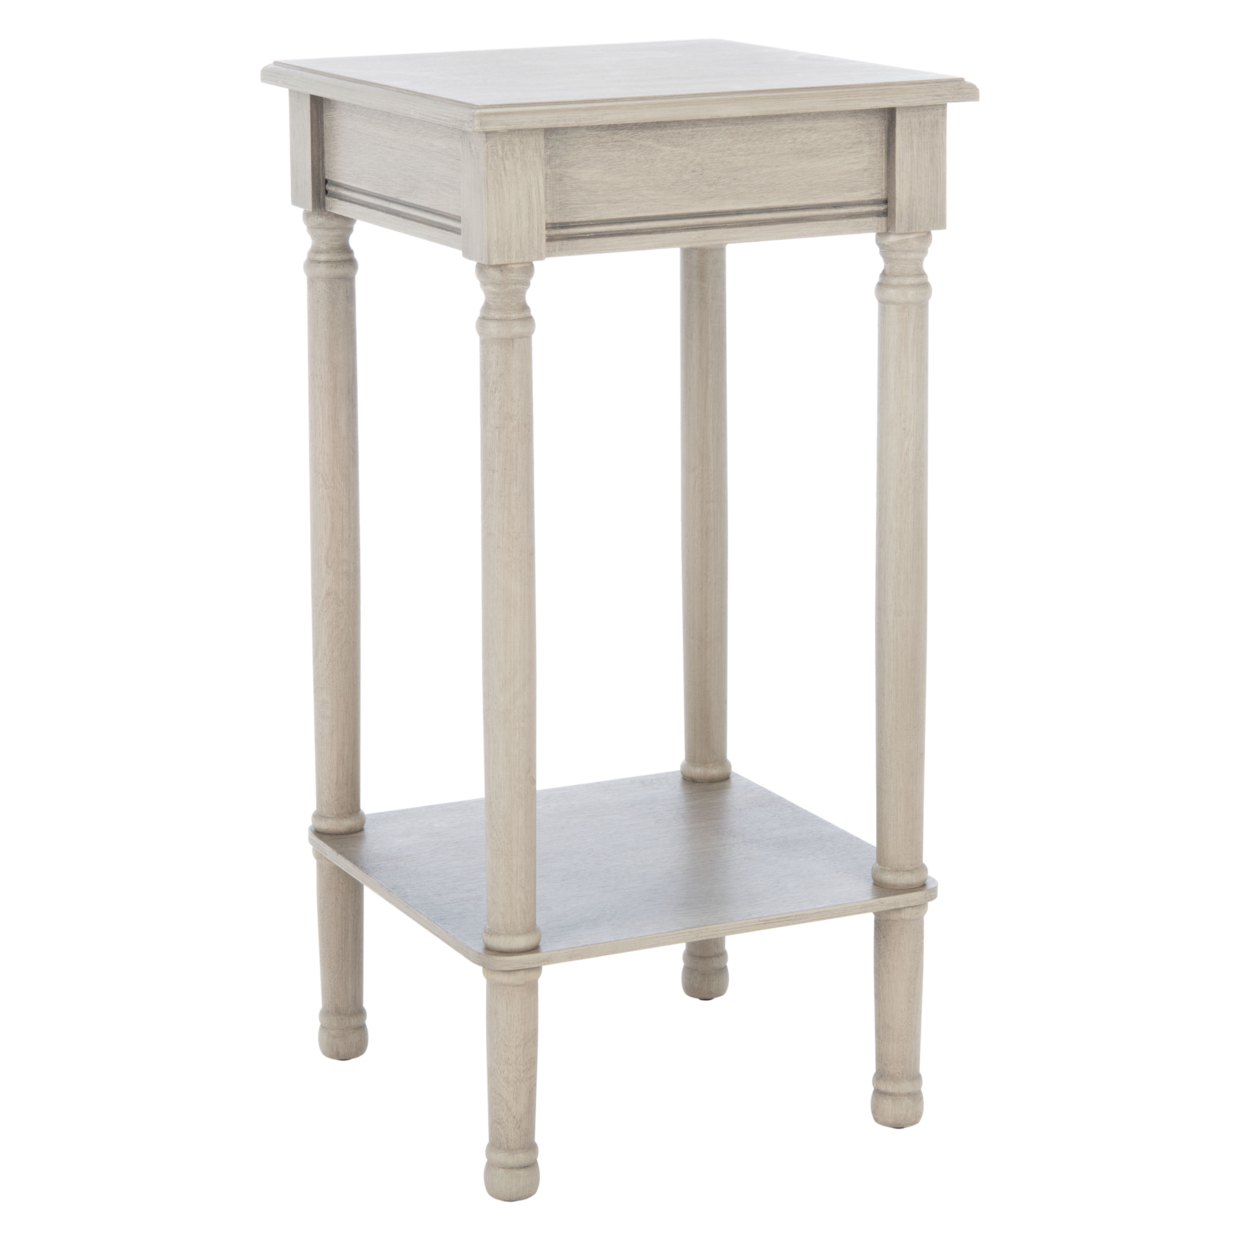 SAFAVIEH Tinsley Square Accent Table Greige